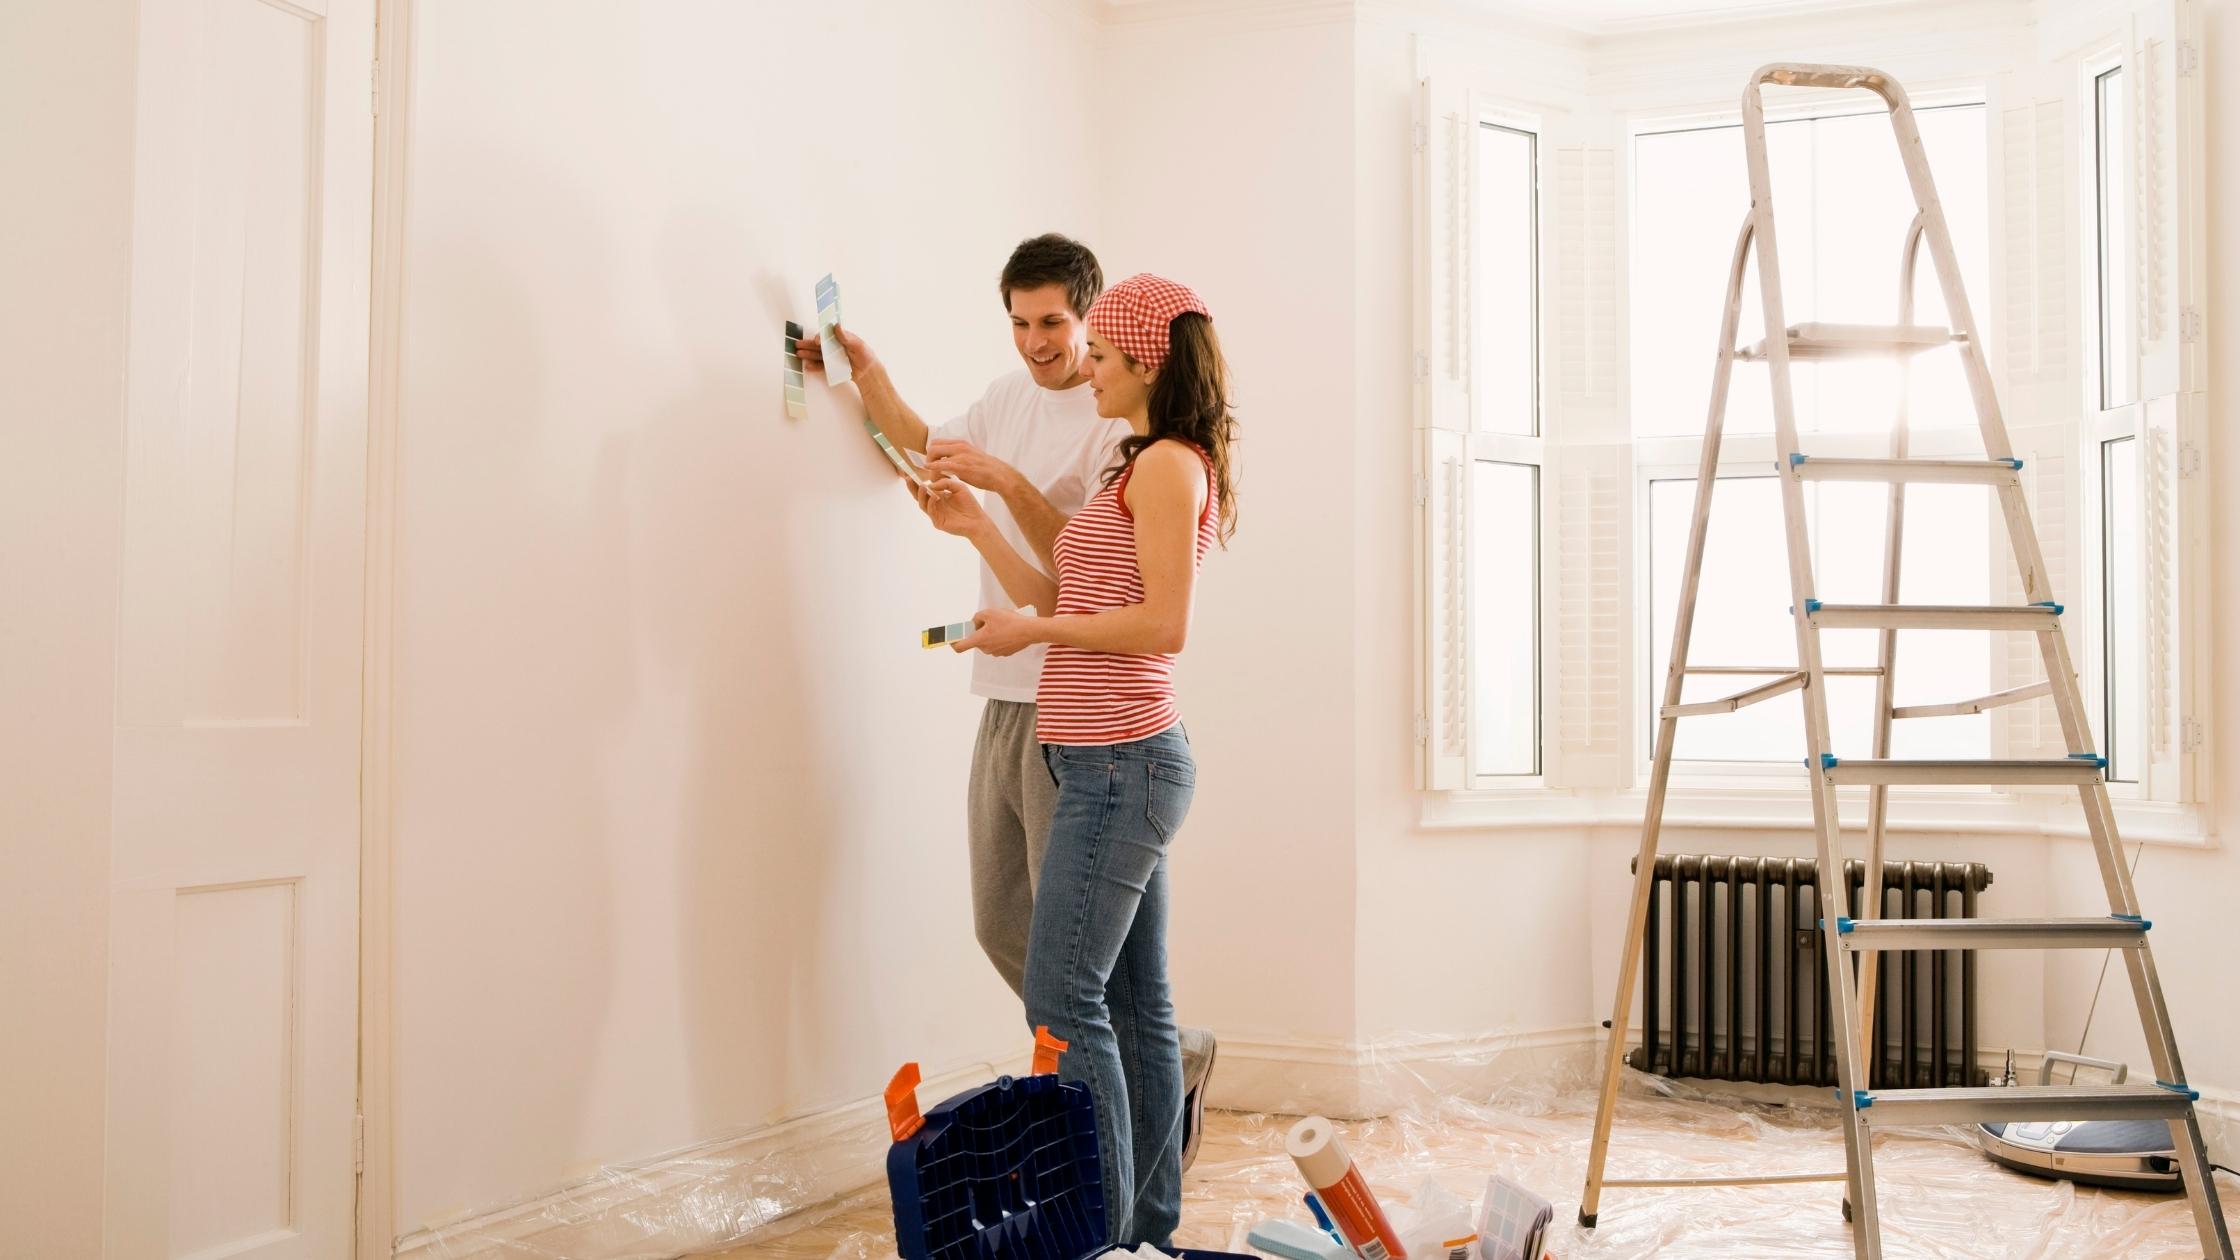 house painters auckland